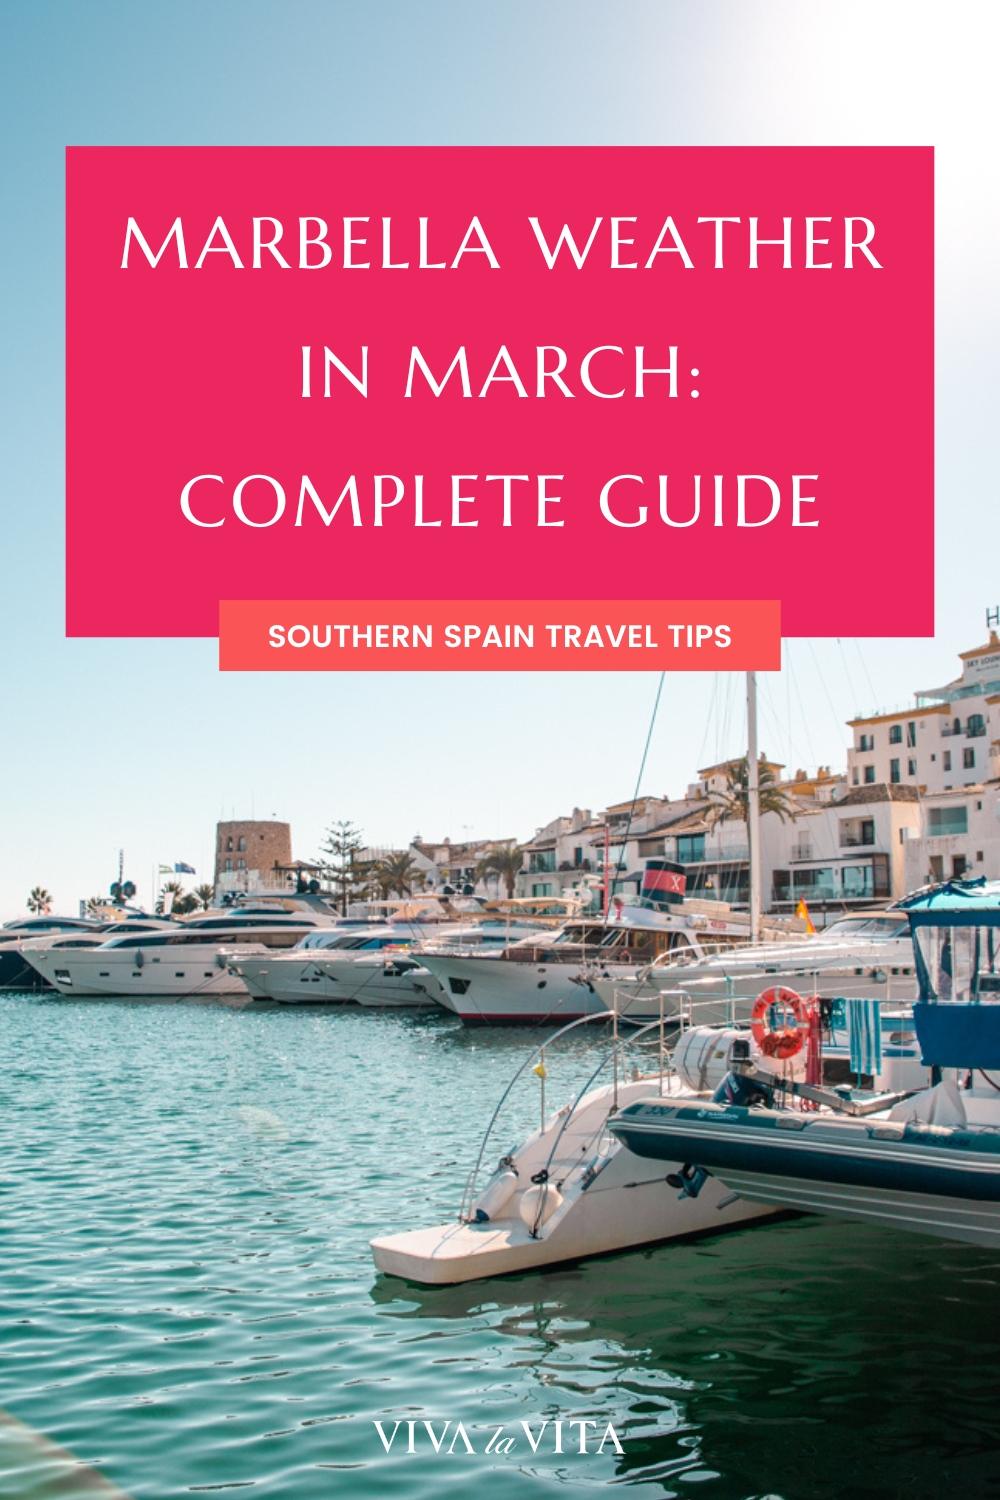 pin image for an article about weather in marbella in March